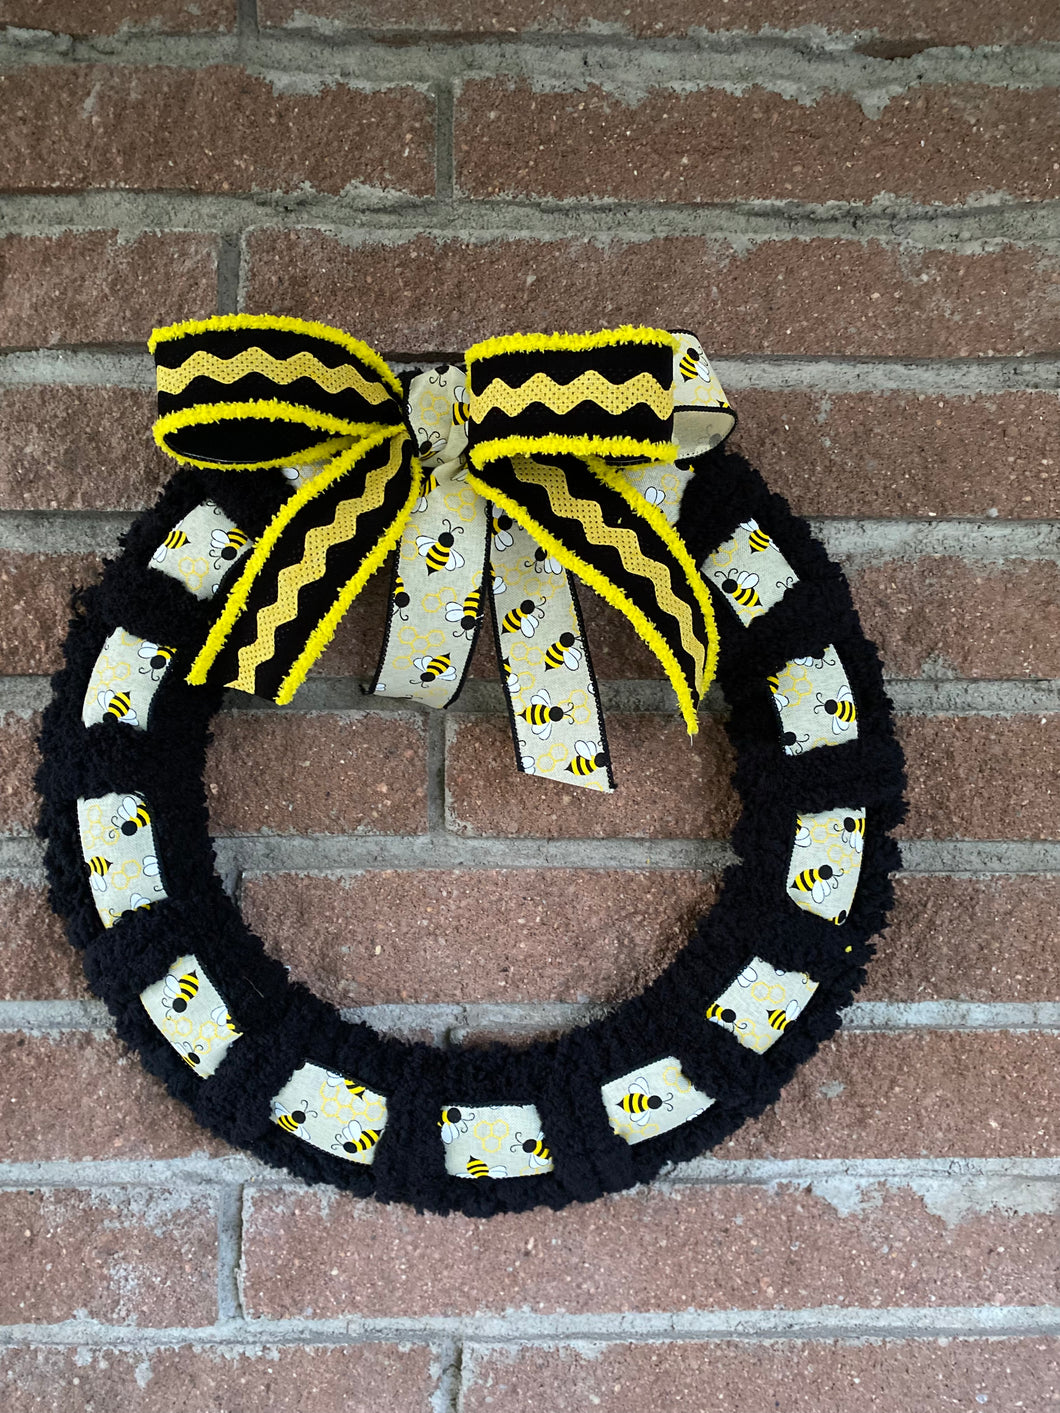 Bumble Bee Ribbon, Faux Canvas Bee Ribbon, Bumble Bee Wire Ribbon, Yellow  and Black Bee Ribbon for Wreaths, Bee Ribbon Wreath Centers 